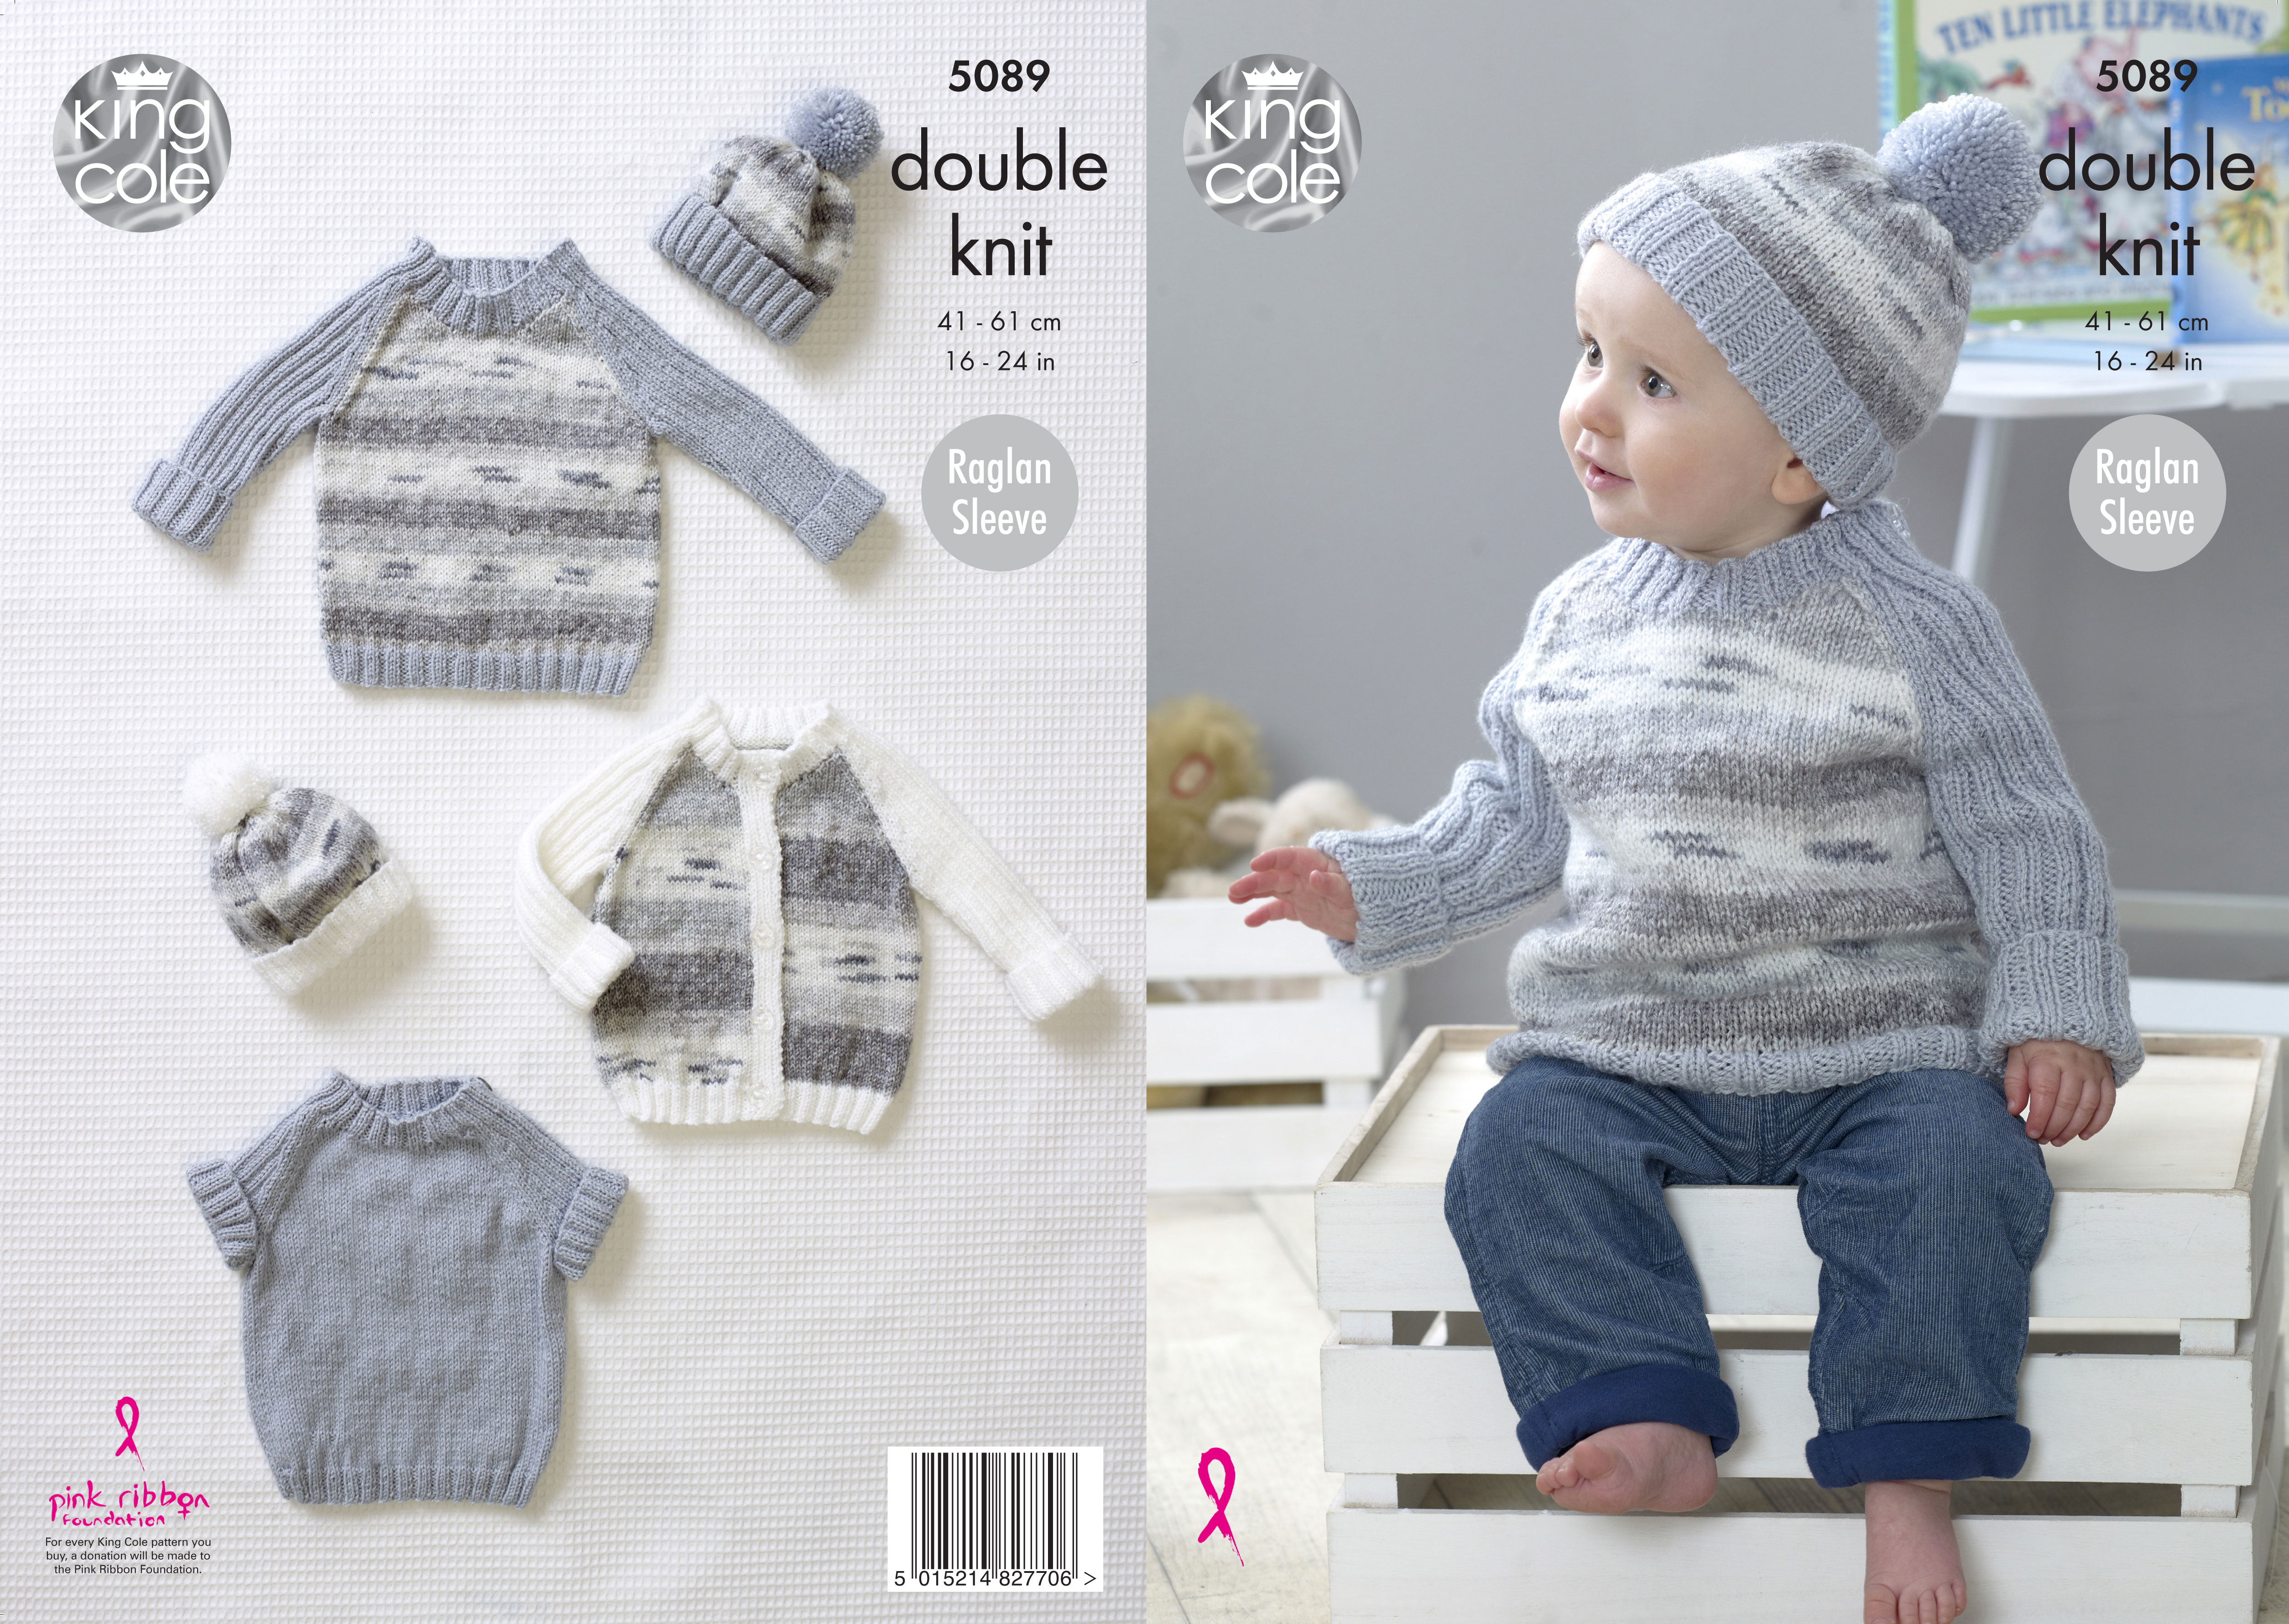 Cardigan, Sweaters & Hat Knitted in Splash 5089 x3